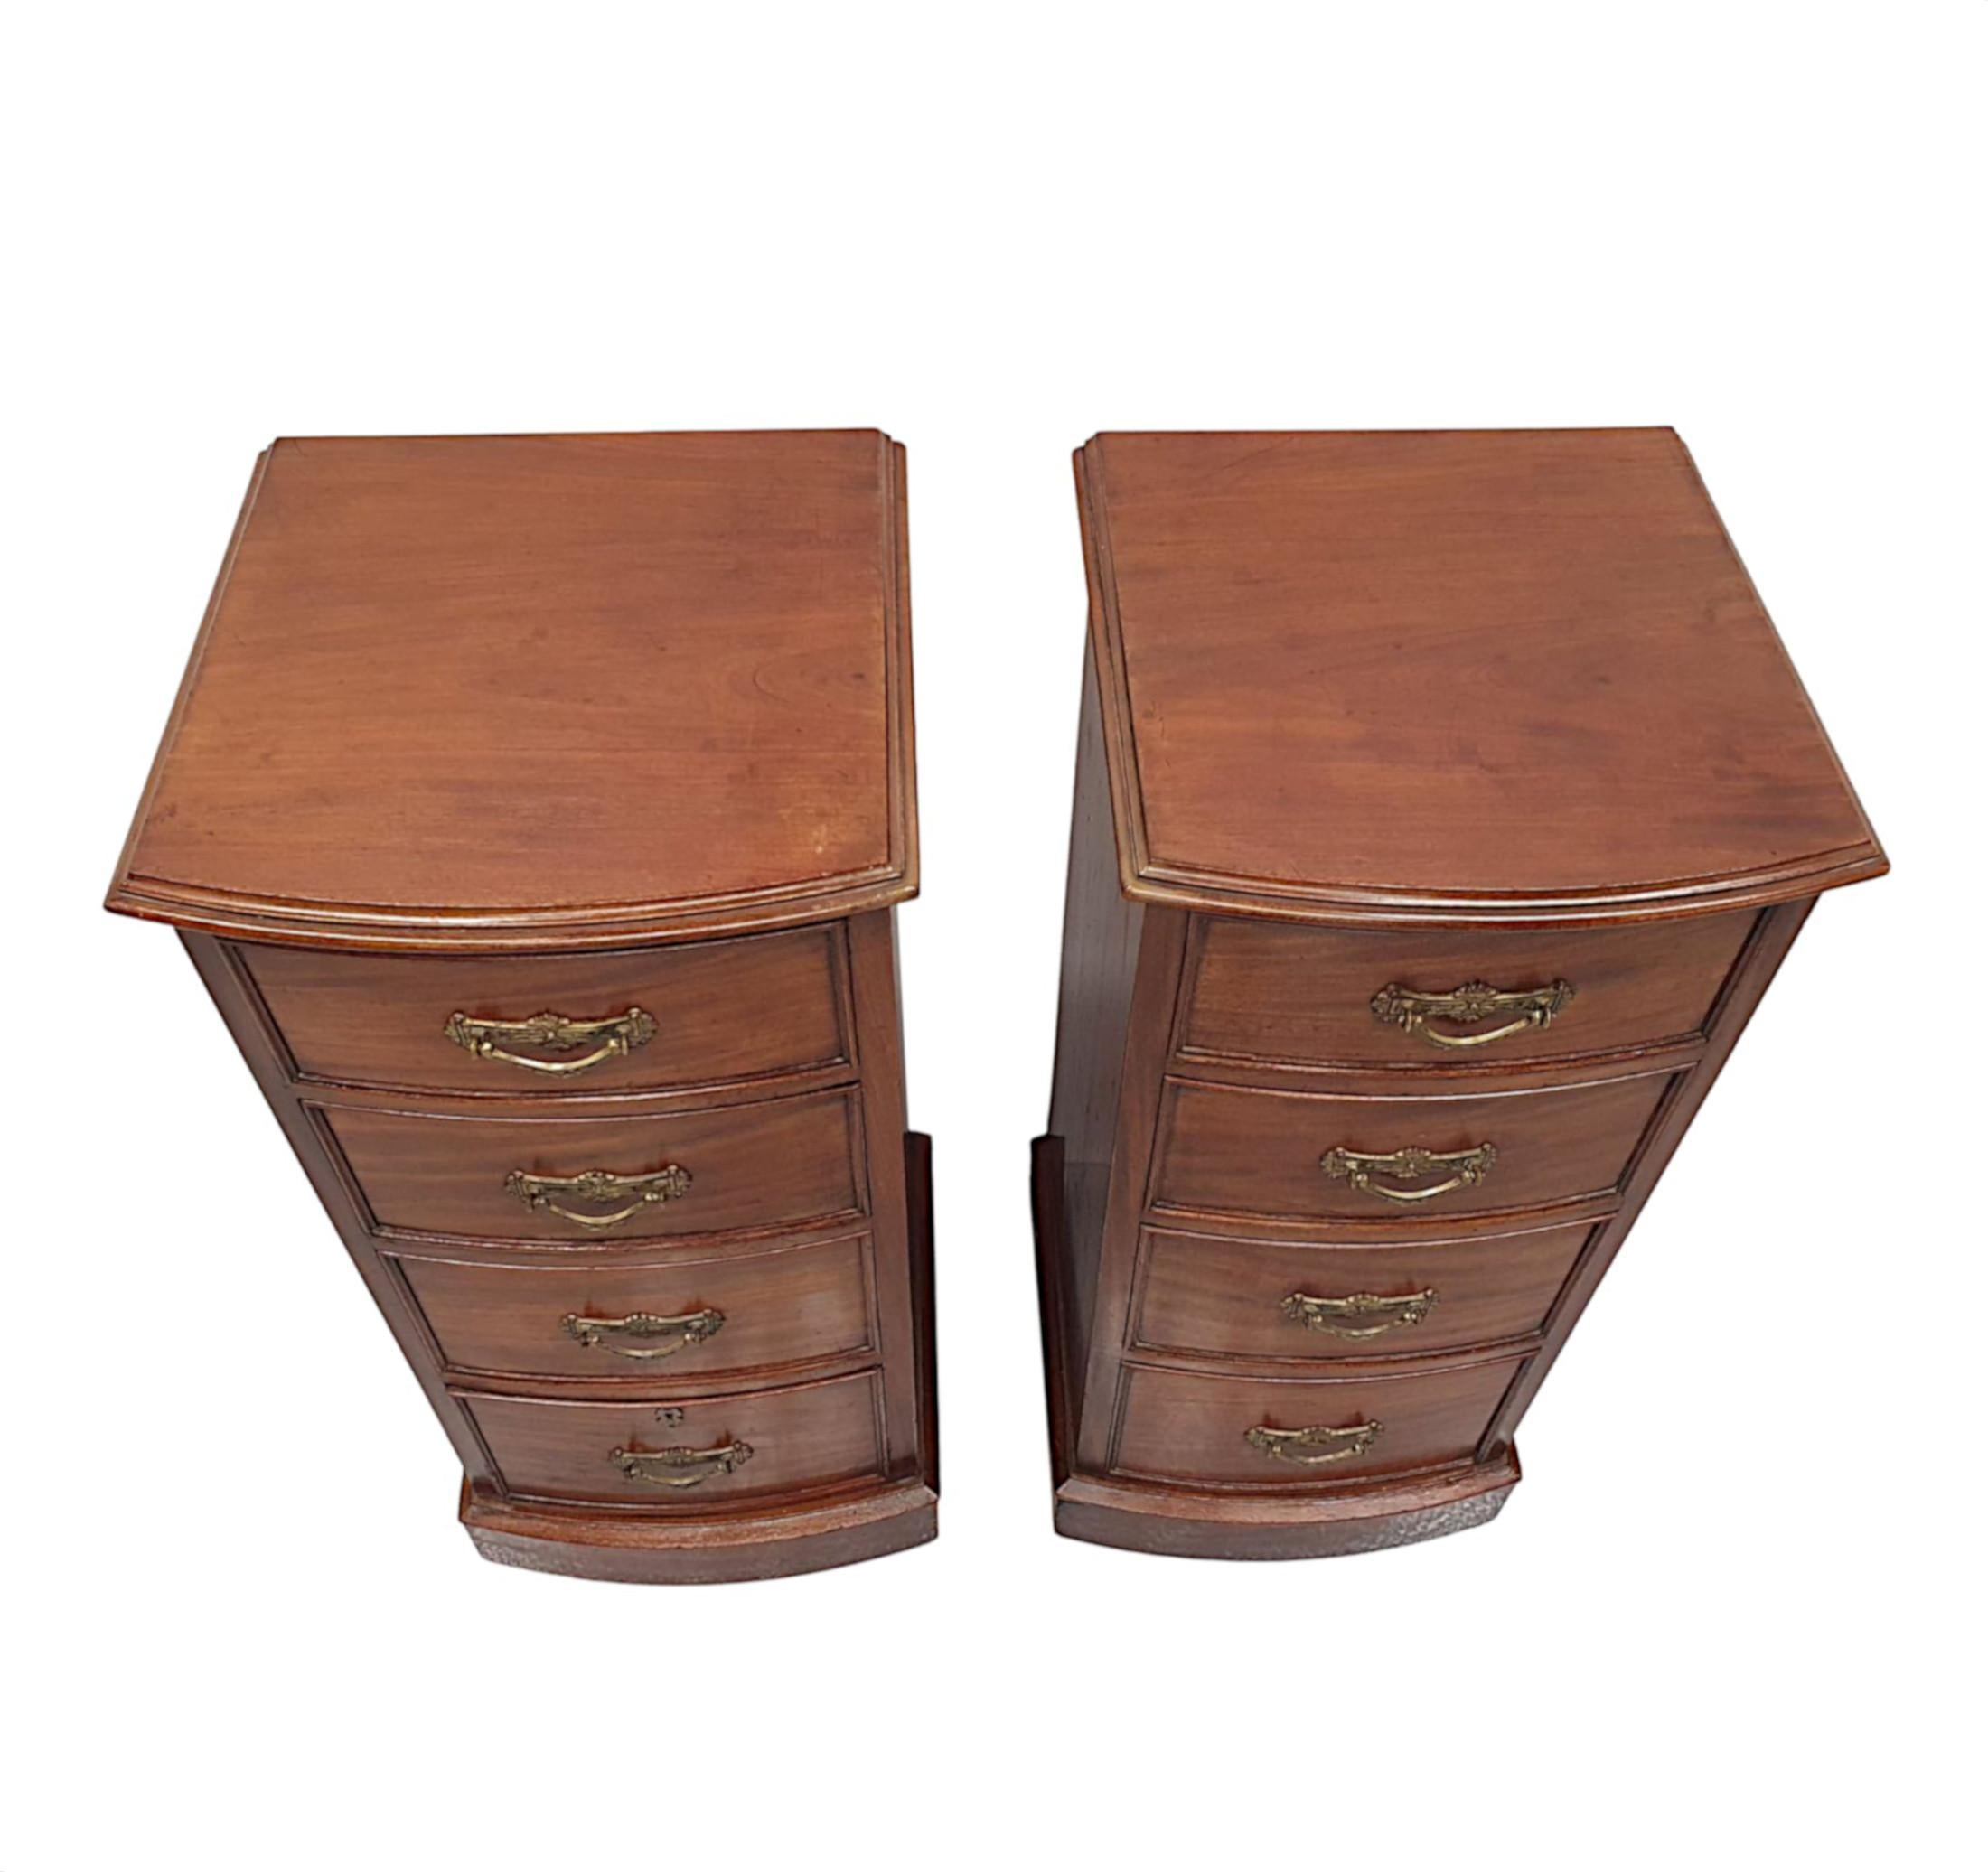 English A Very Fine Pair of Large 19th Century Bow Fronted Bedside Chests For Sale